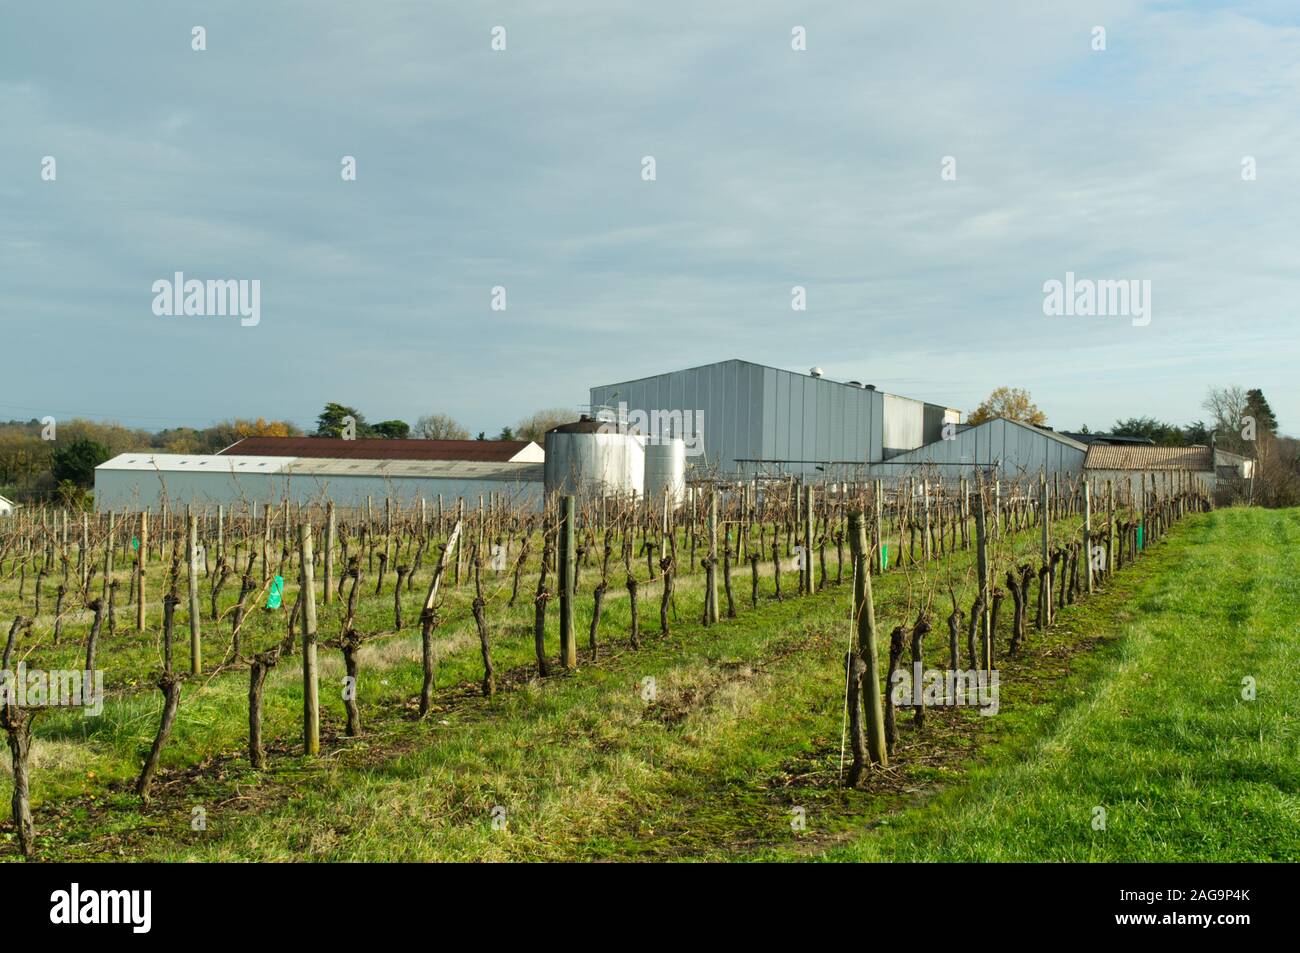 The winery of Berticot  and Graman viewed through the vinyard of winter vines at Landerrouat, Bordeaux wine region, Gironde, France. Stock Photo